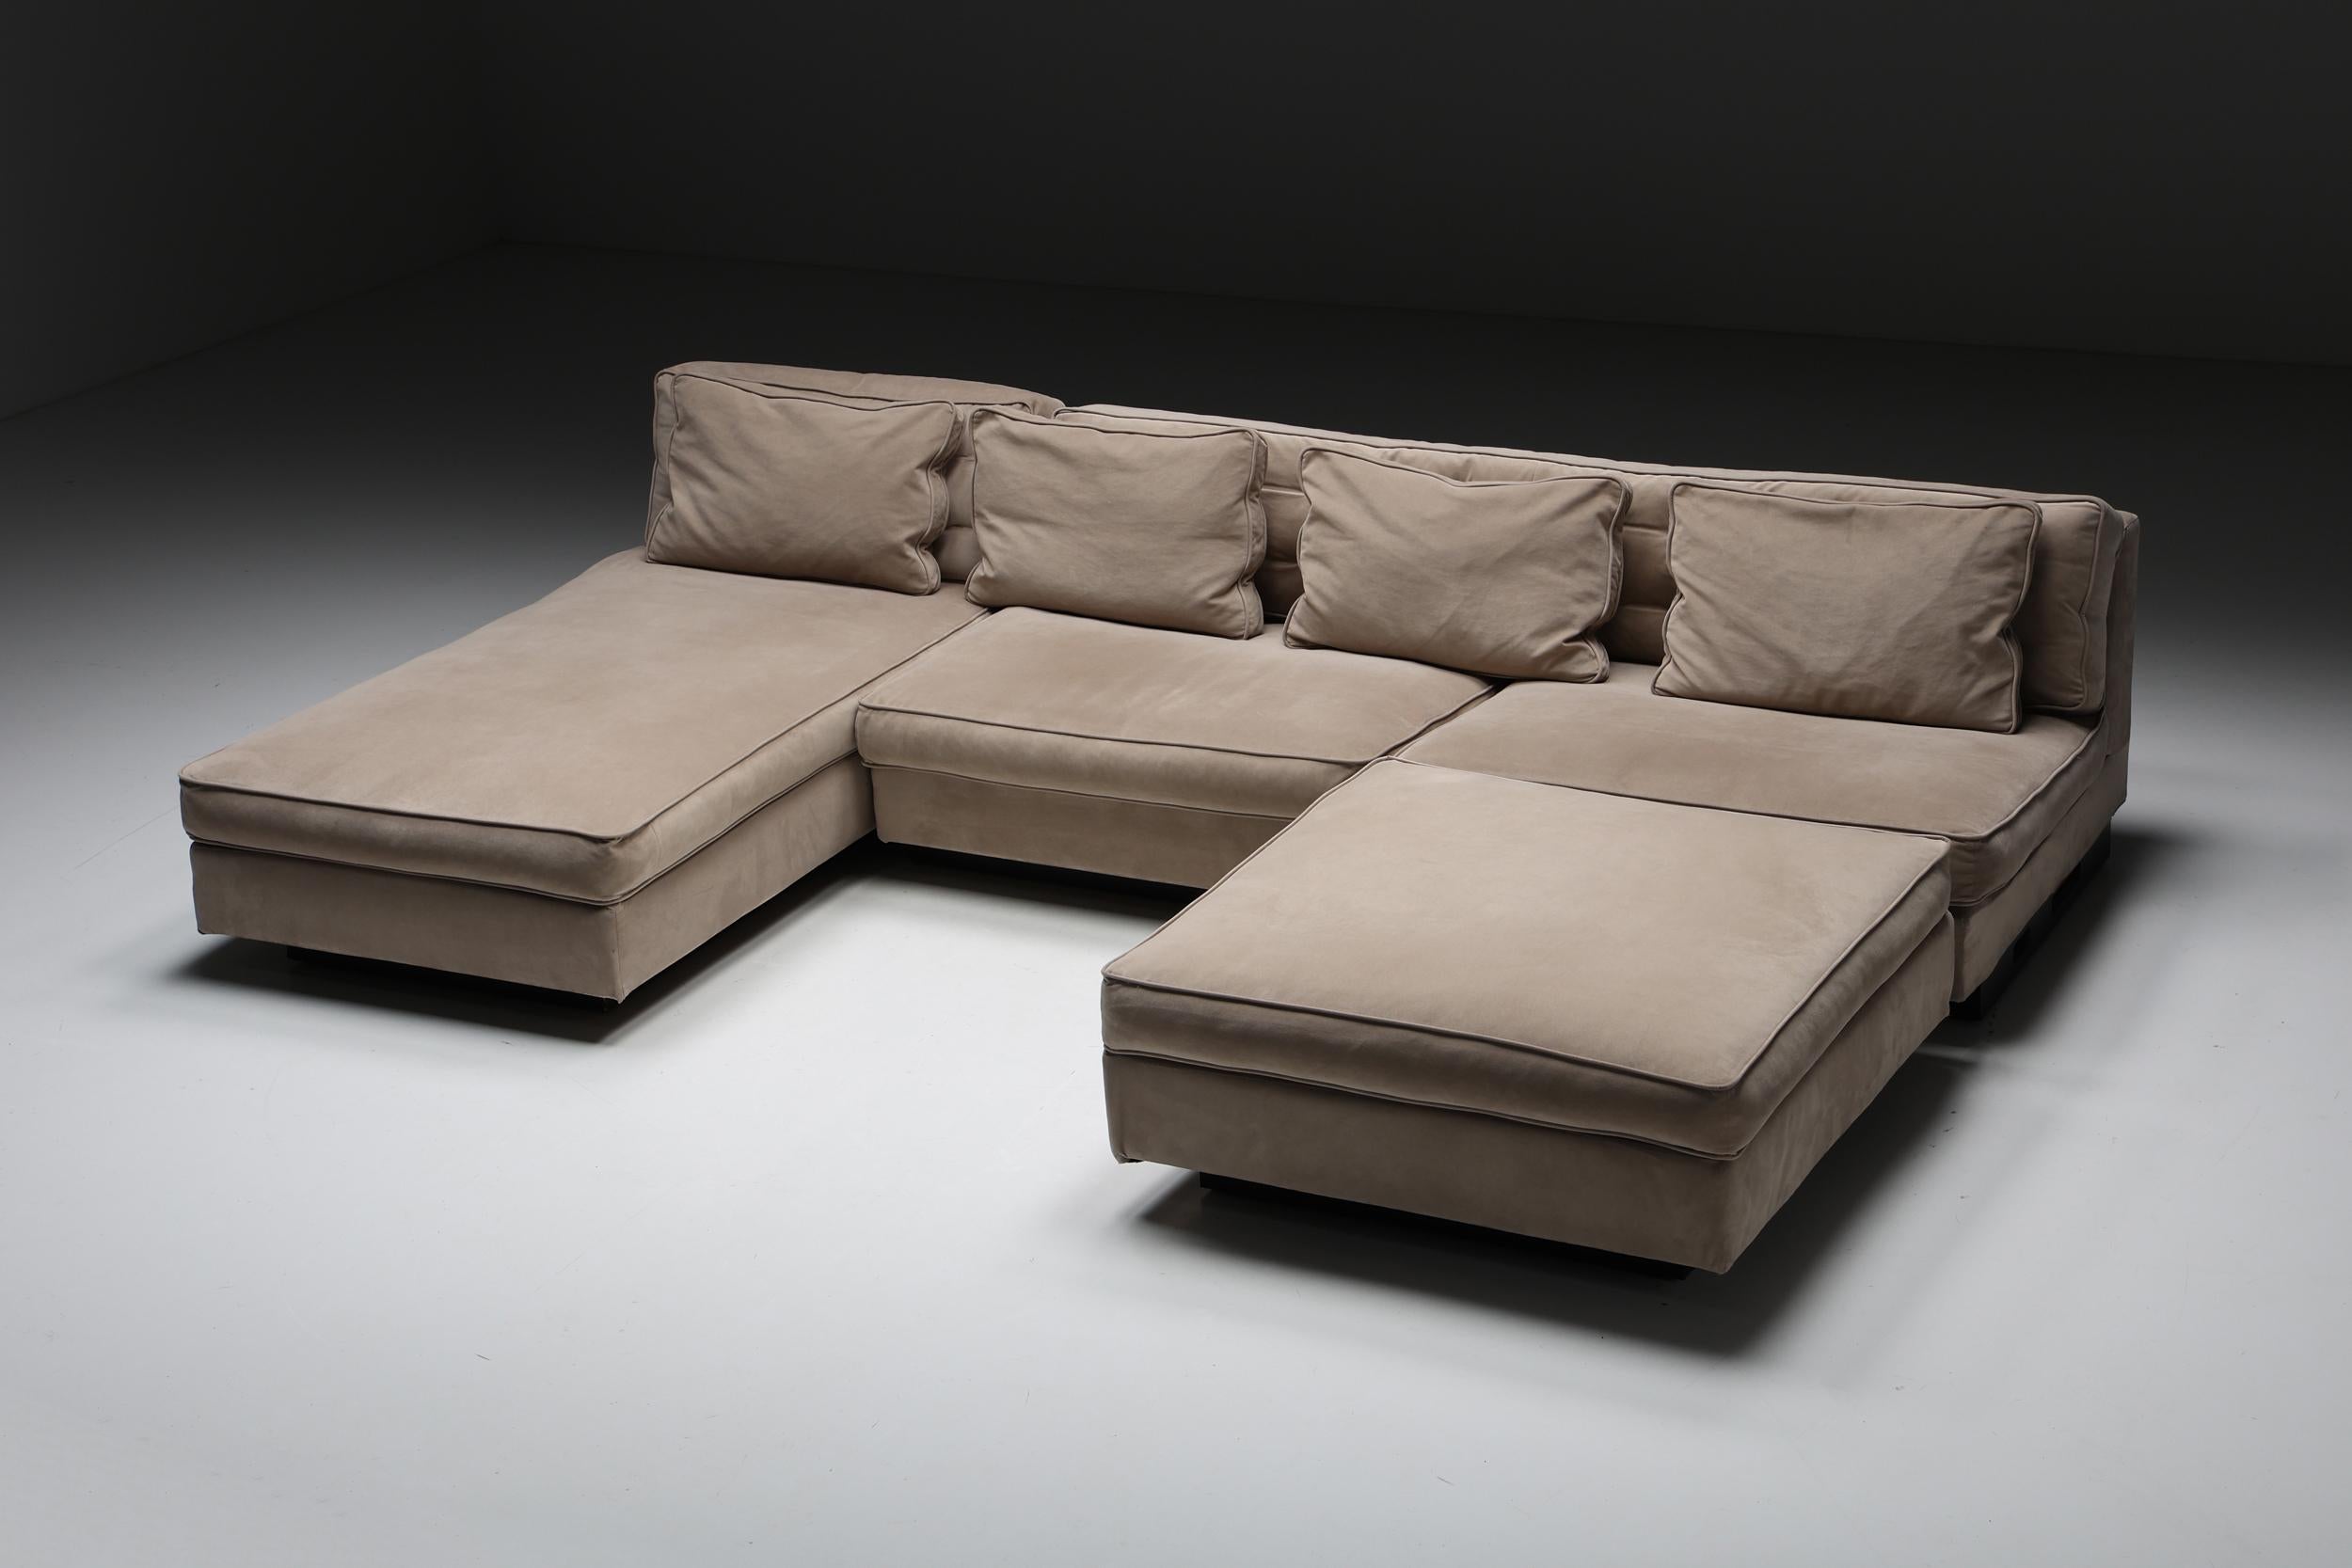 Giorgetti royal sofa Antonello Mosca 1970s, Italy, Italian design, velvet, upholstery; modular; sectional sofa; 1970s; sofa; settee; couch; modular seating system; the royal series; Postmodern.

Italian sofa by Antonello Mosca for the Royal series